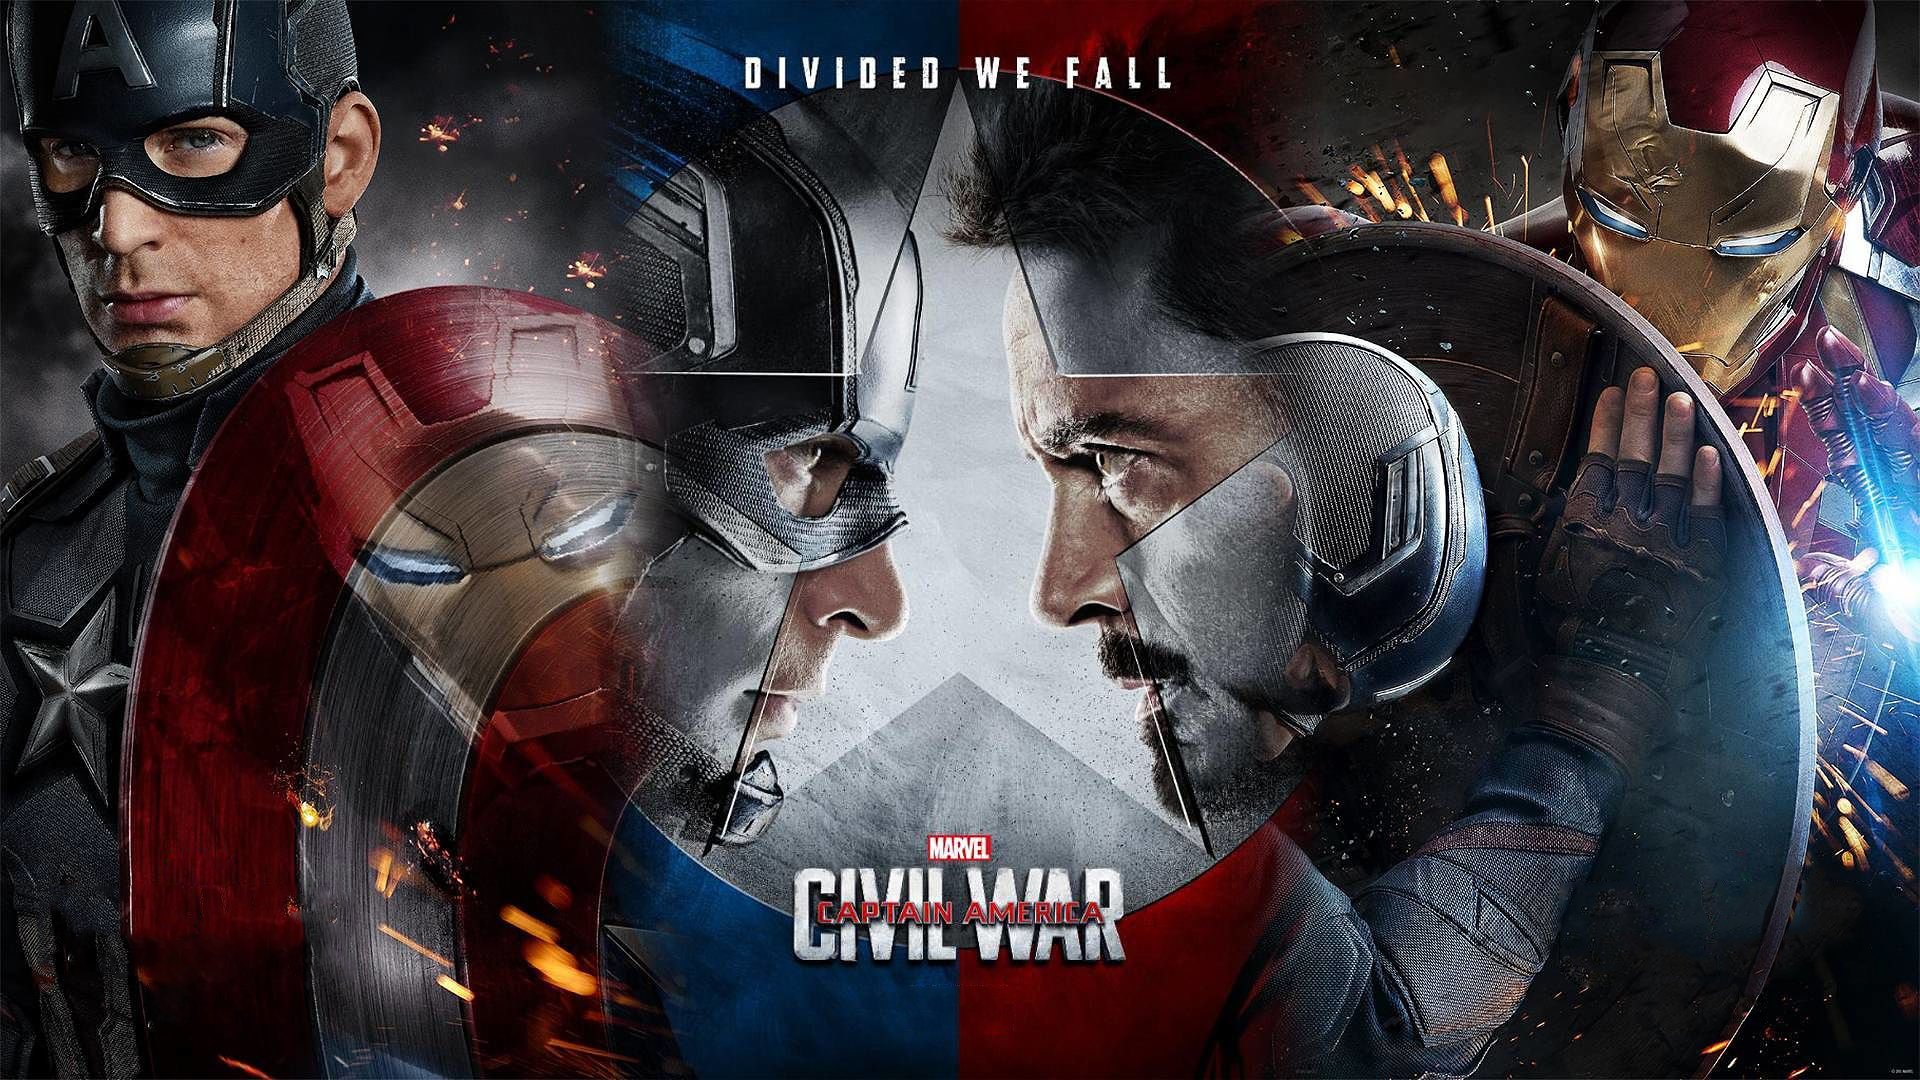 Divided We Fall Hd Wallpaper Background Image 1920x1080 Id